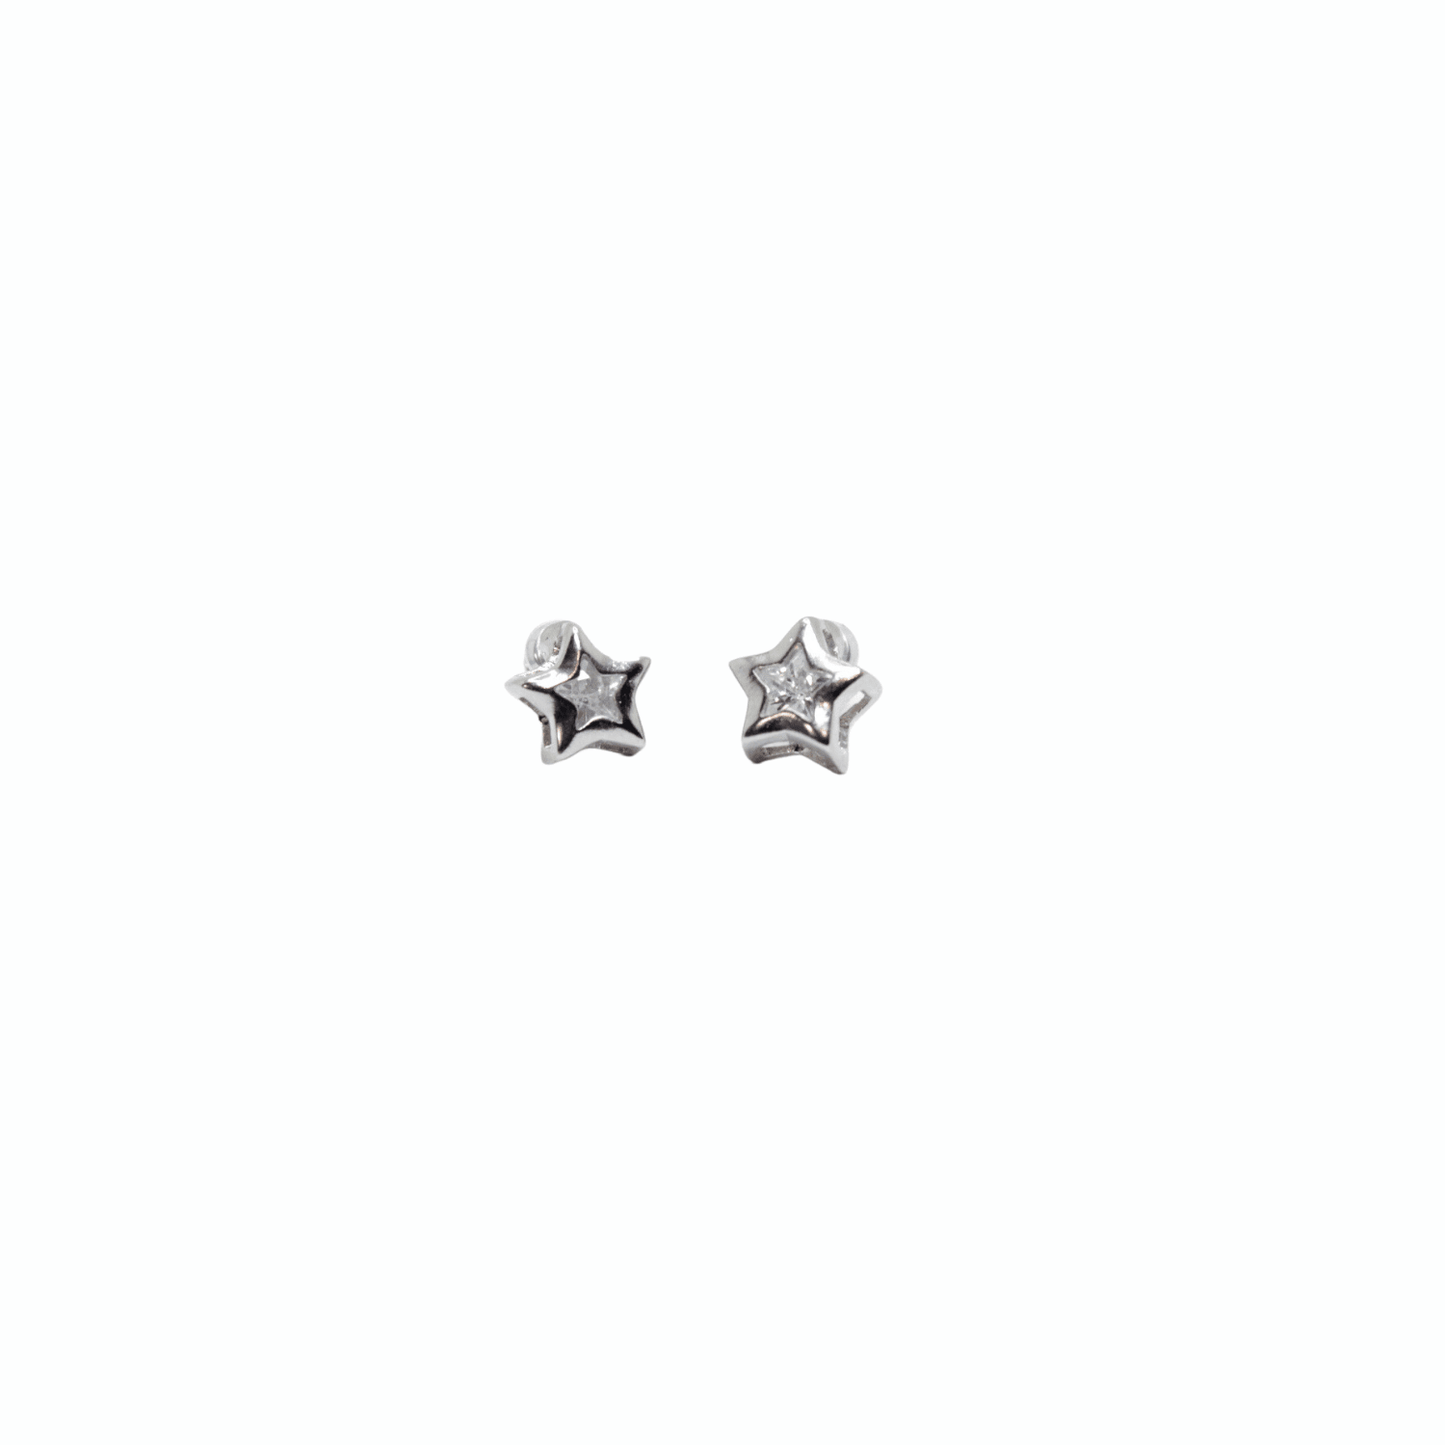 Star shaped Stud earrings with Sterling Silver Overlay - J & S Expressions